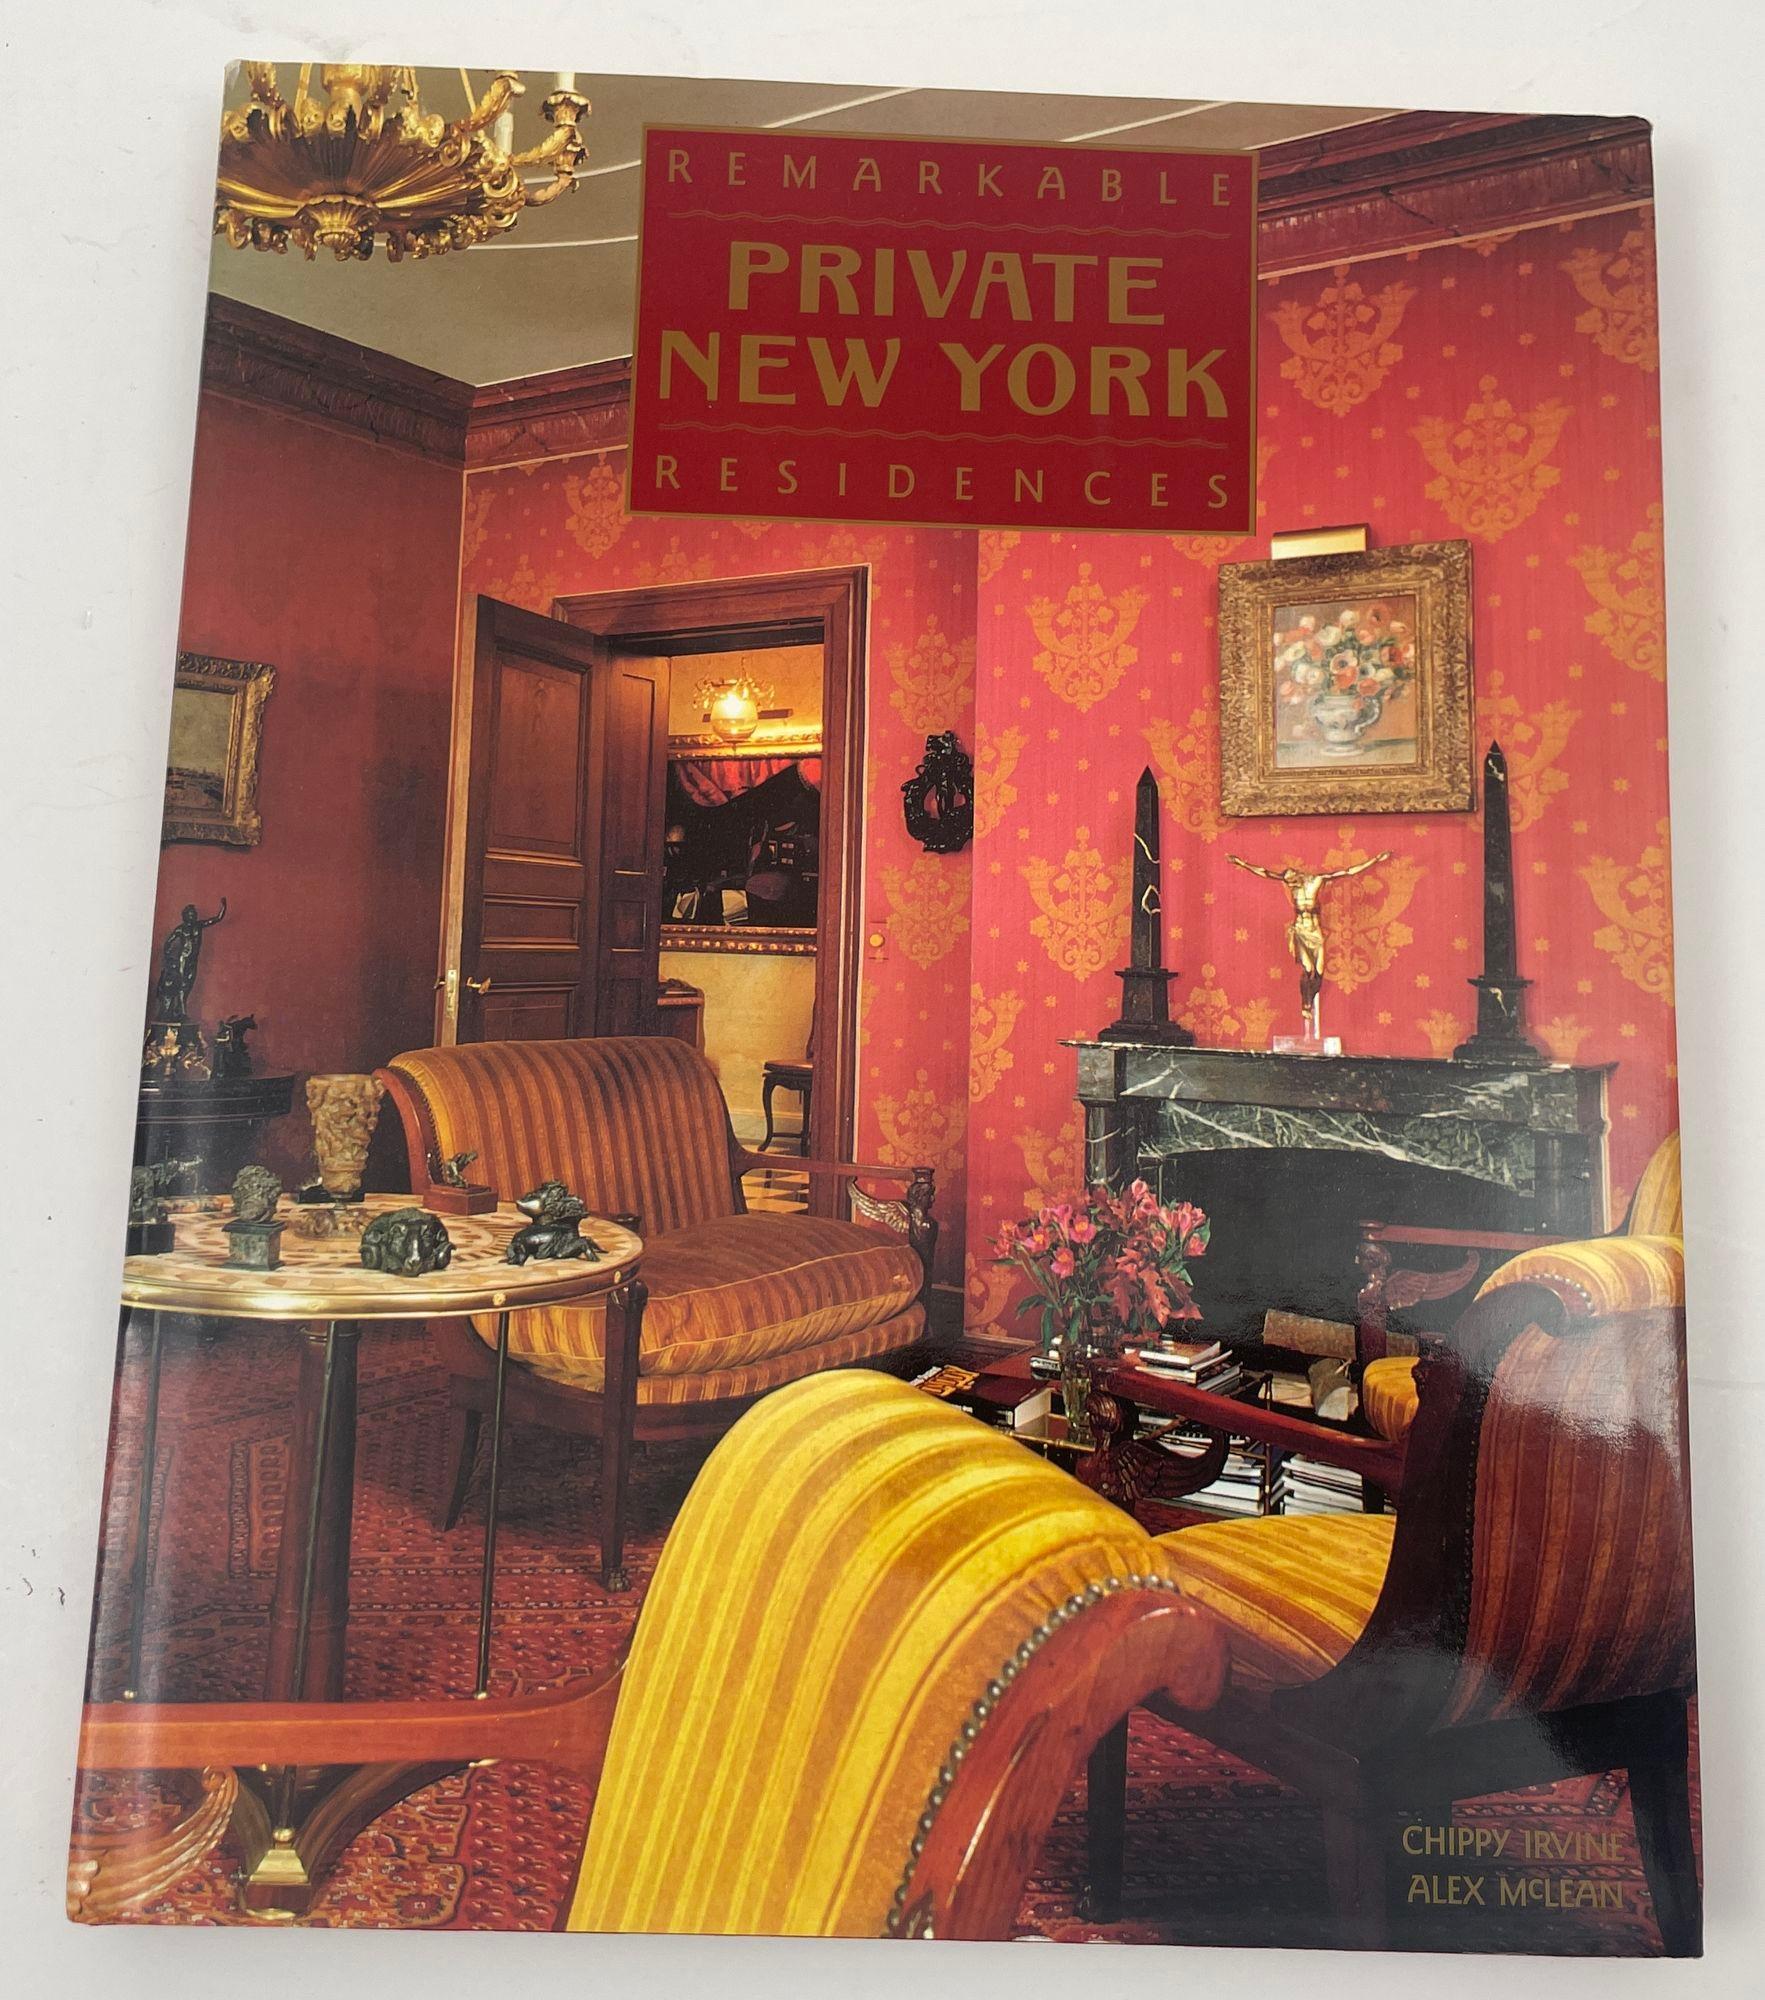 NEW YORK APARTMENTS Private Views Hardcover Coffee Table Book.
Jamee Gregory, Charles Davey.
New York: Rizzoli, 2004. First Edition; First Printing. Hardcover.
Rizzoli, 2004 - Architecture - 205 pages.
New York Apartments presents the interiors of